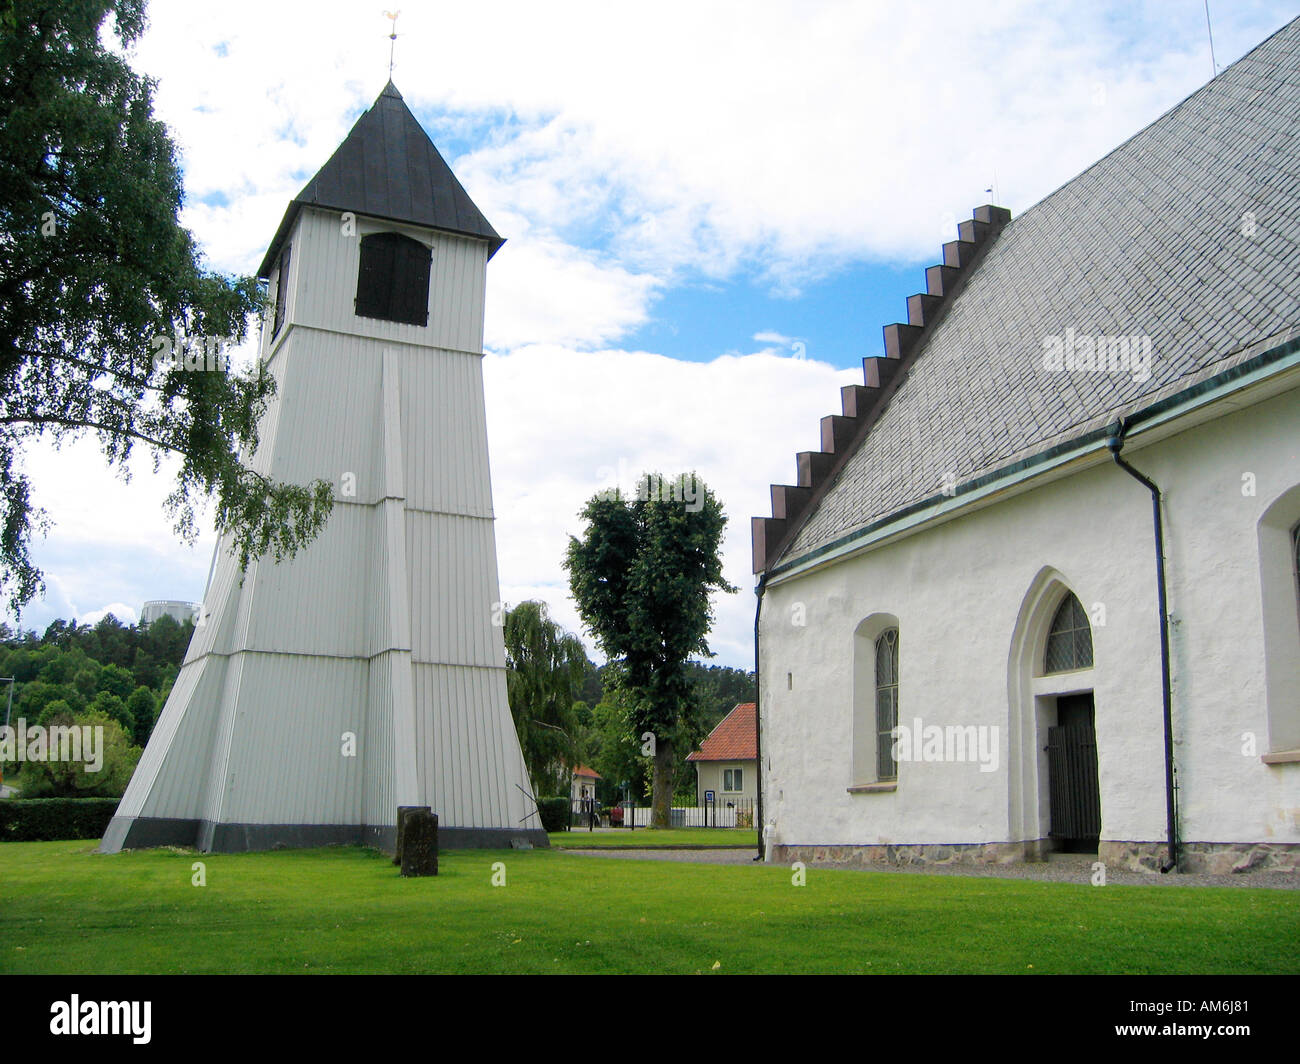 The 14th century church Drothems kyrka with a separate clock tower in idyllic Söderköping Sweden Stock Photo